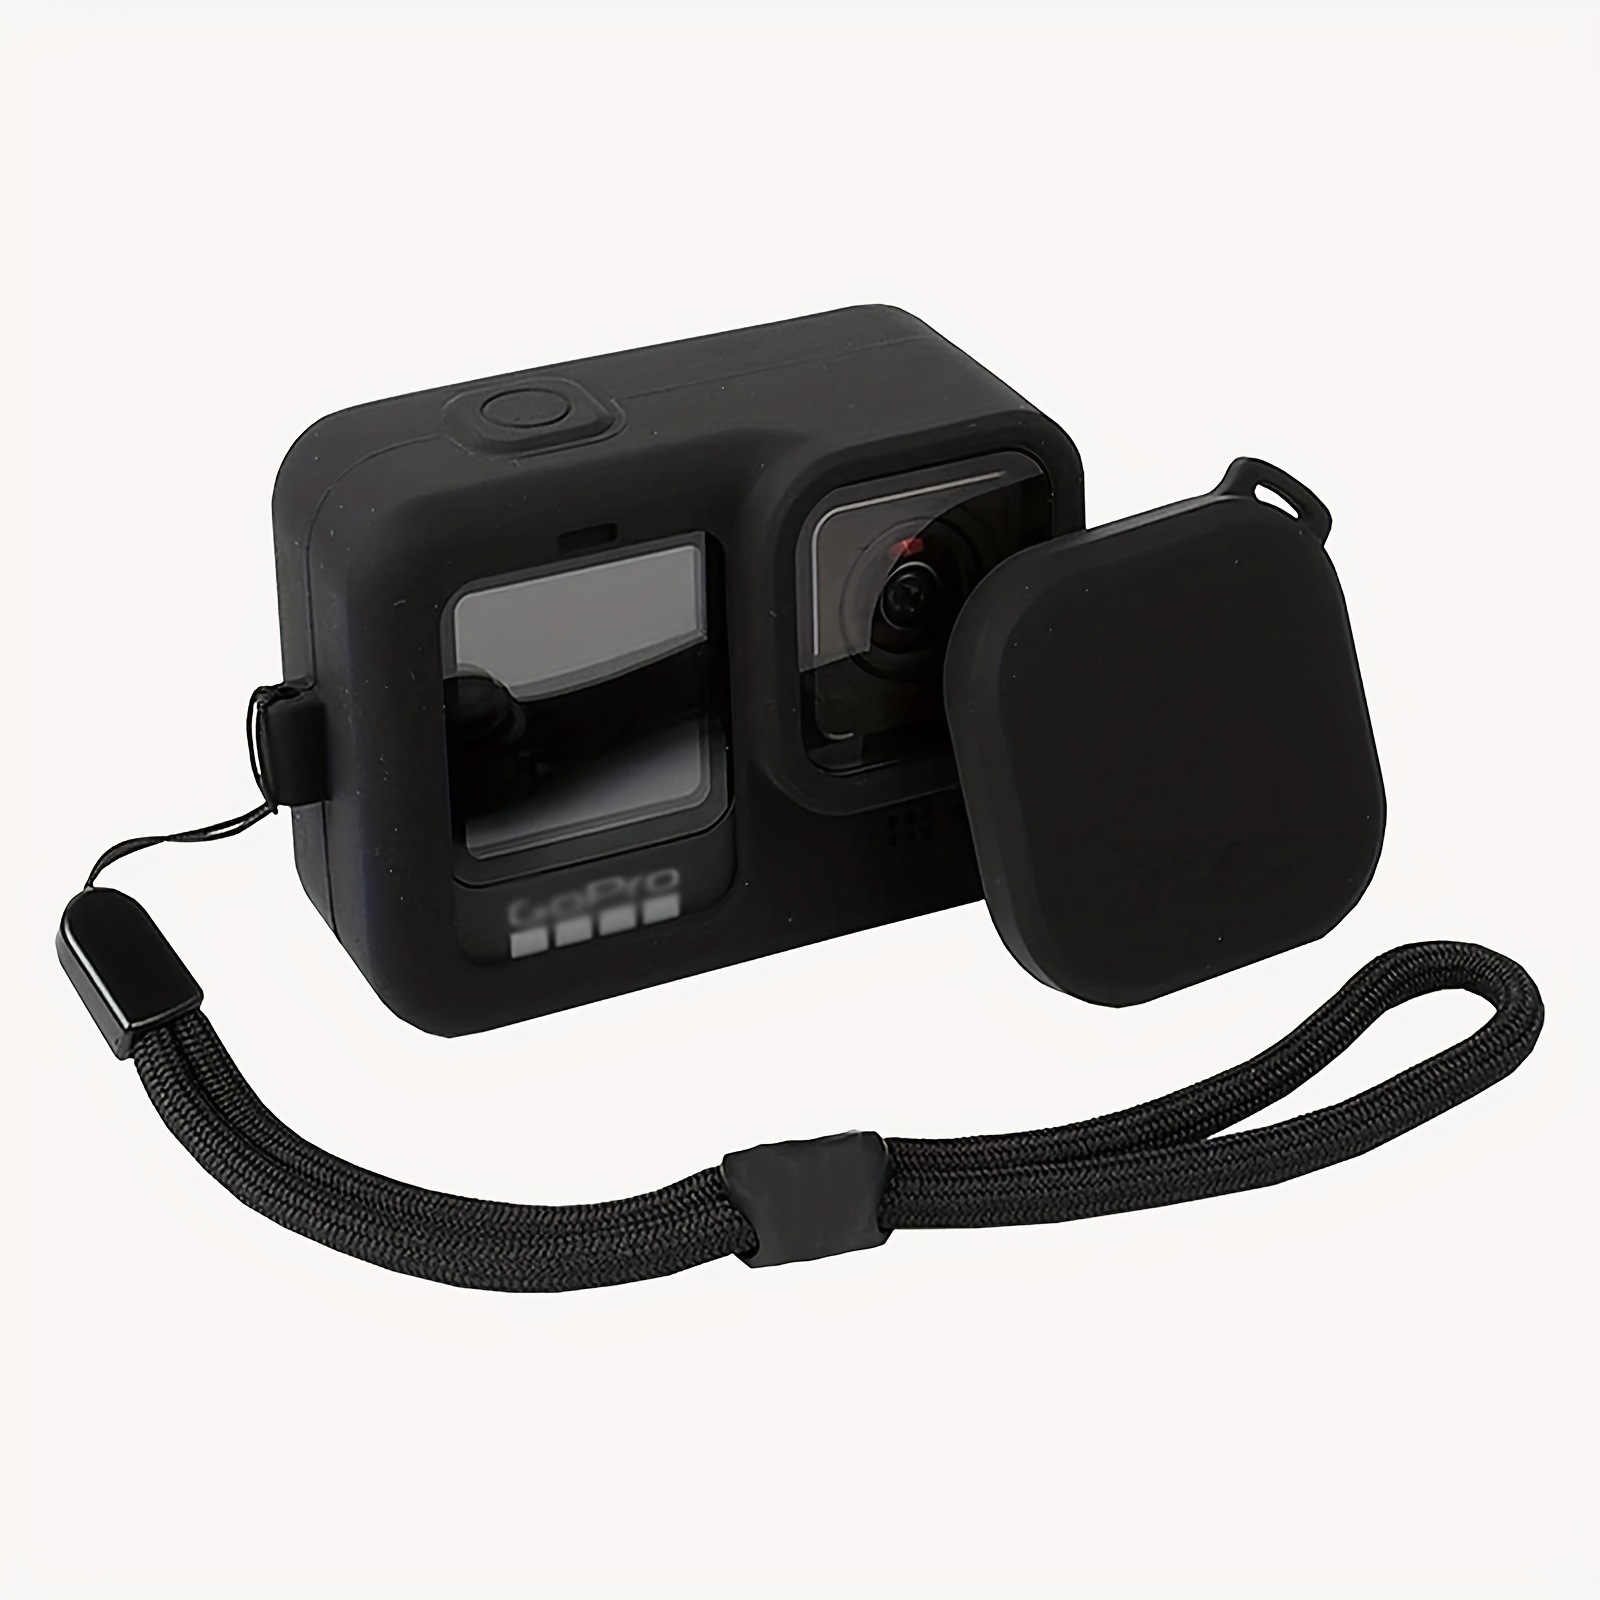 Protective Case for GoPro Hero 9 10 11 12 Black with Lanyard&Lens